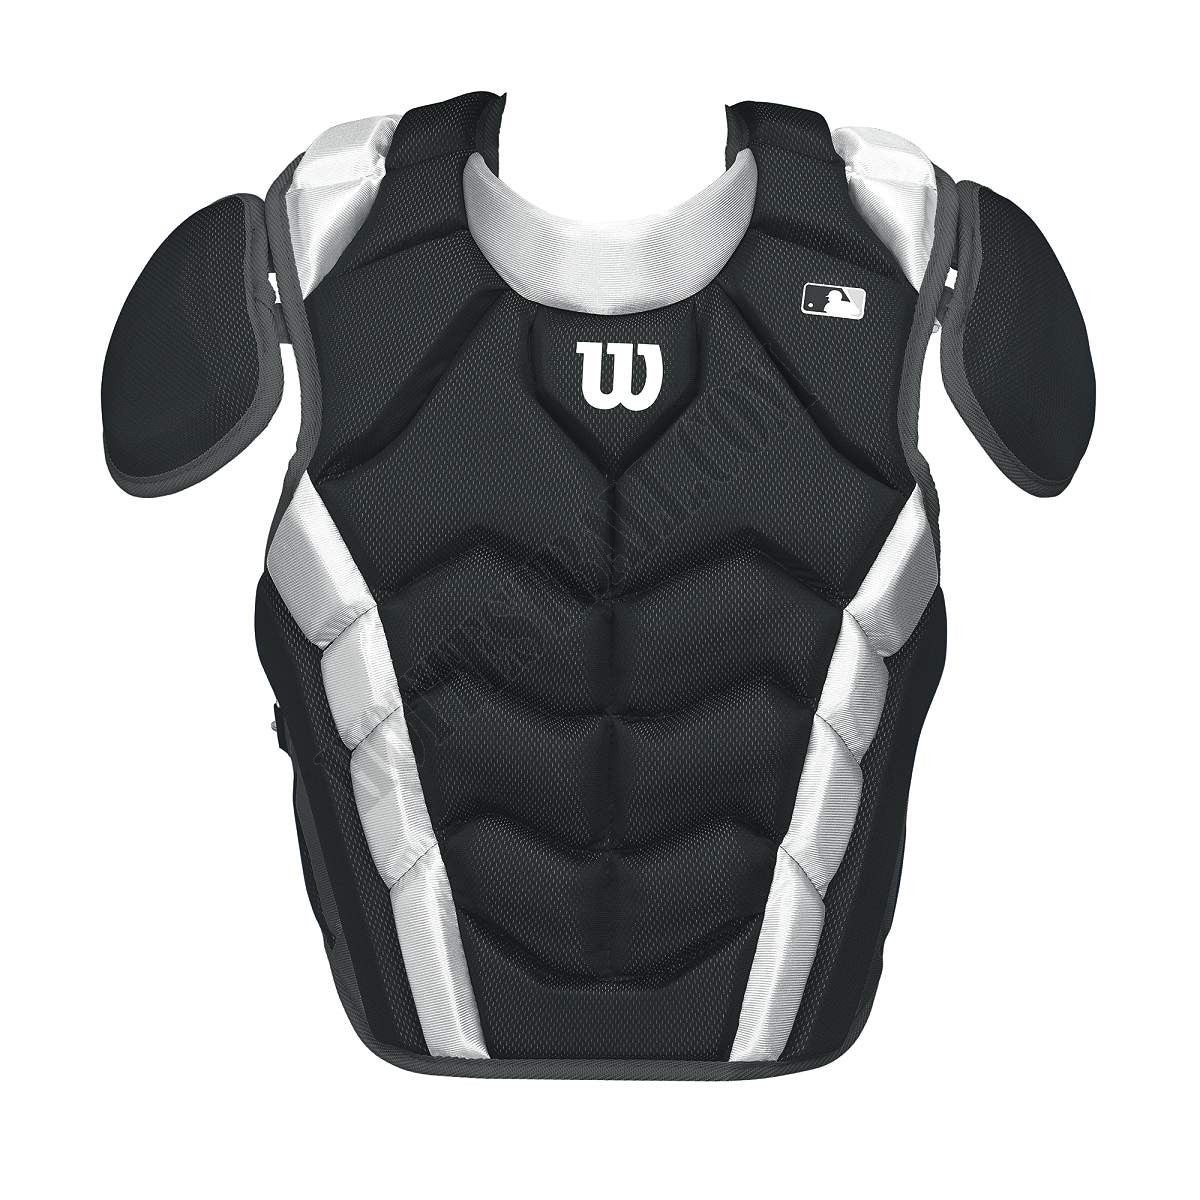 Pro Stock Chest Protector - Wilson Discount Store - Pro Stock Chest Protector - Wilson Discount Store